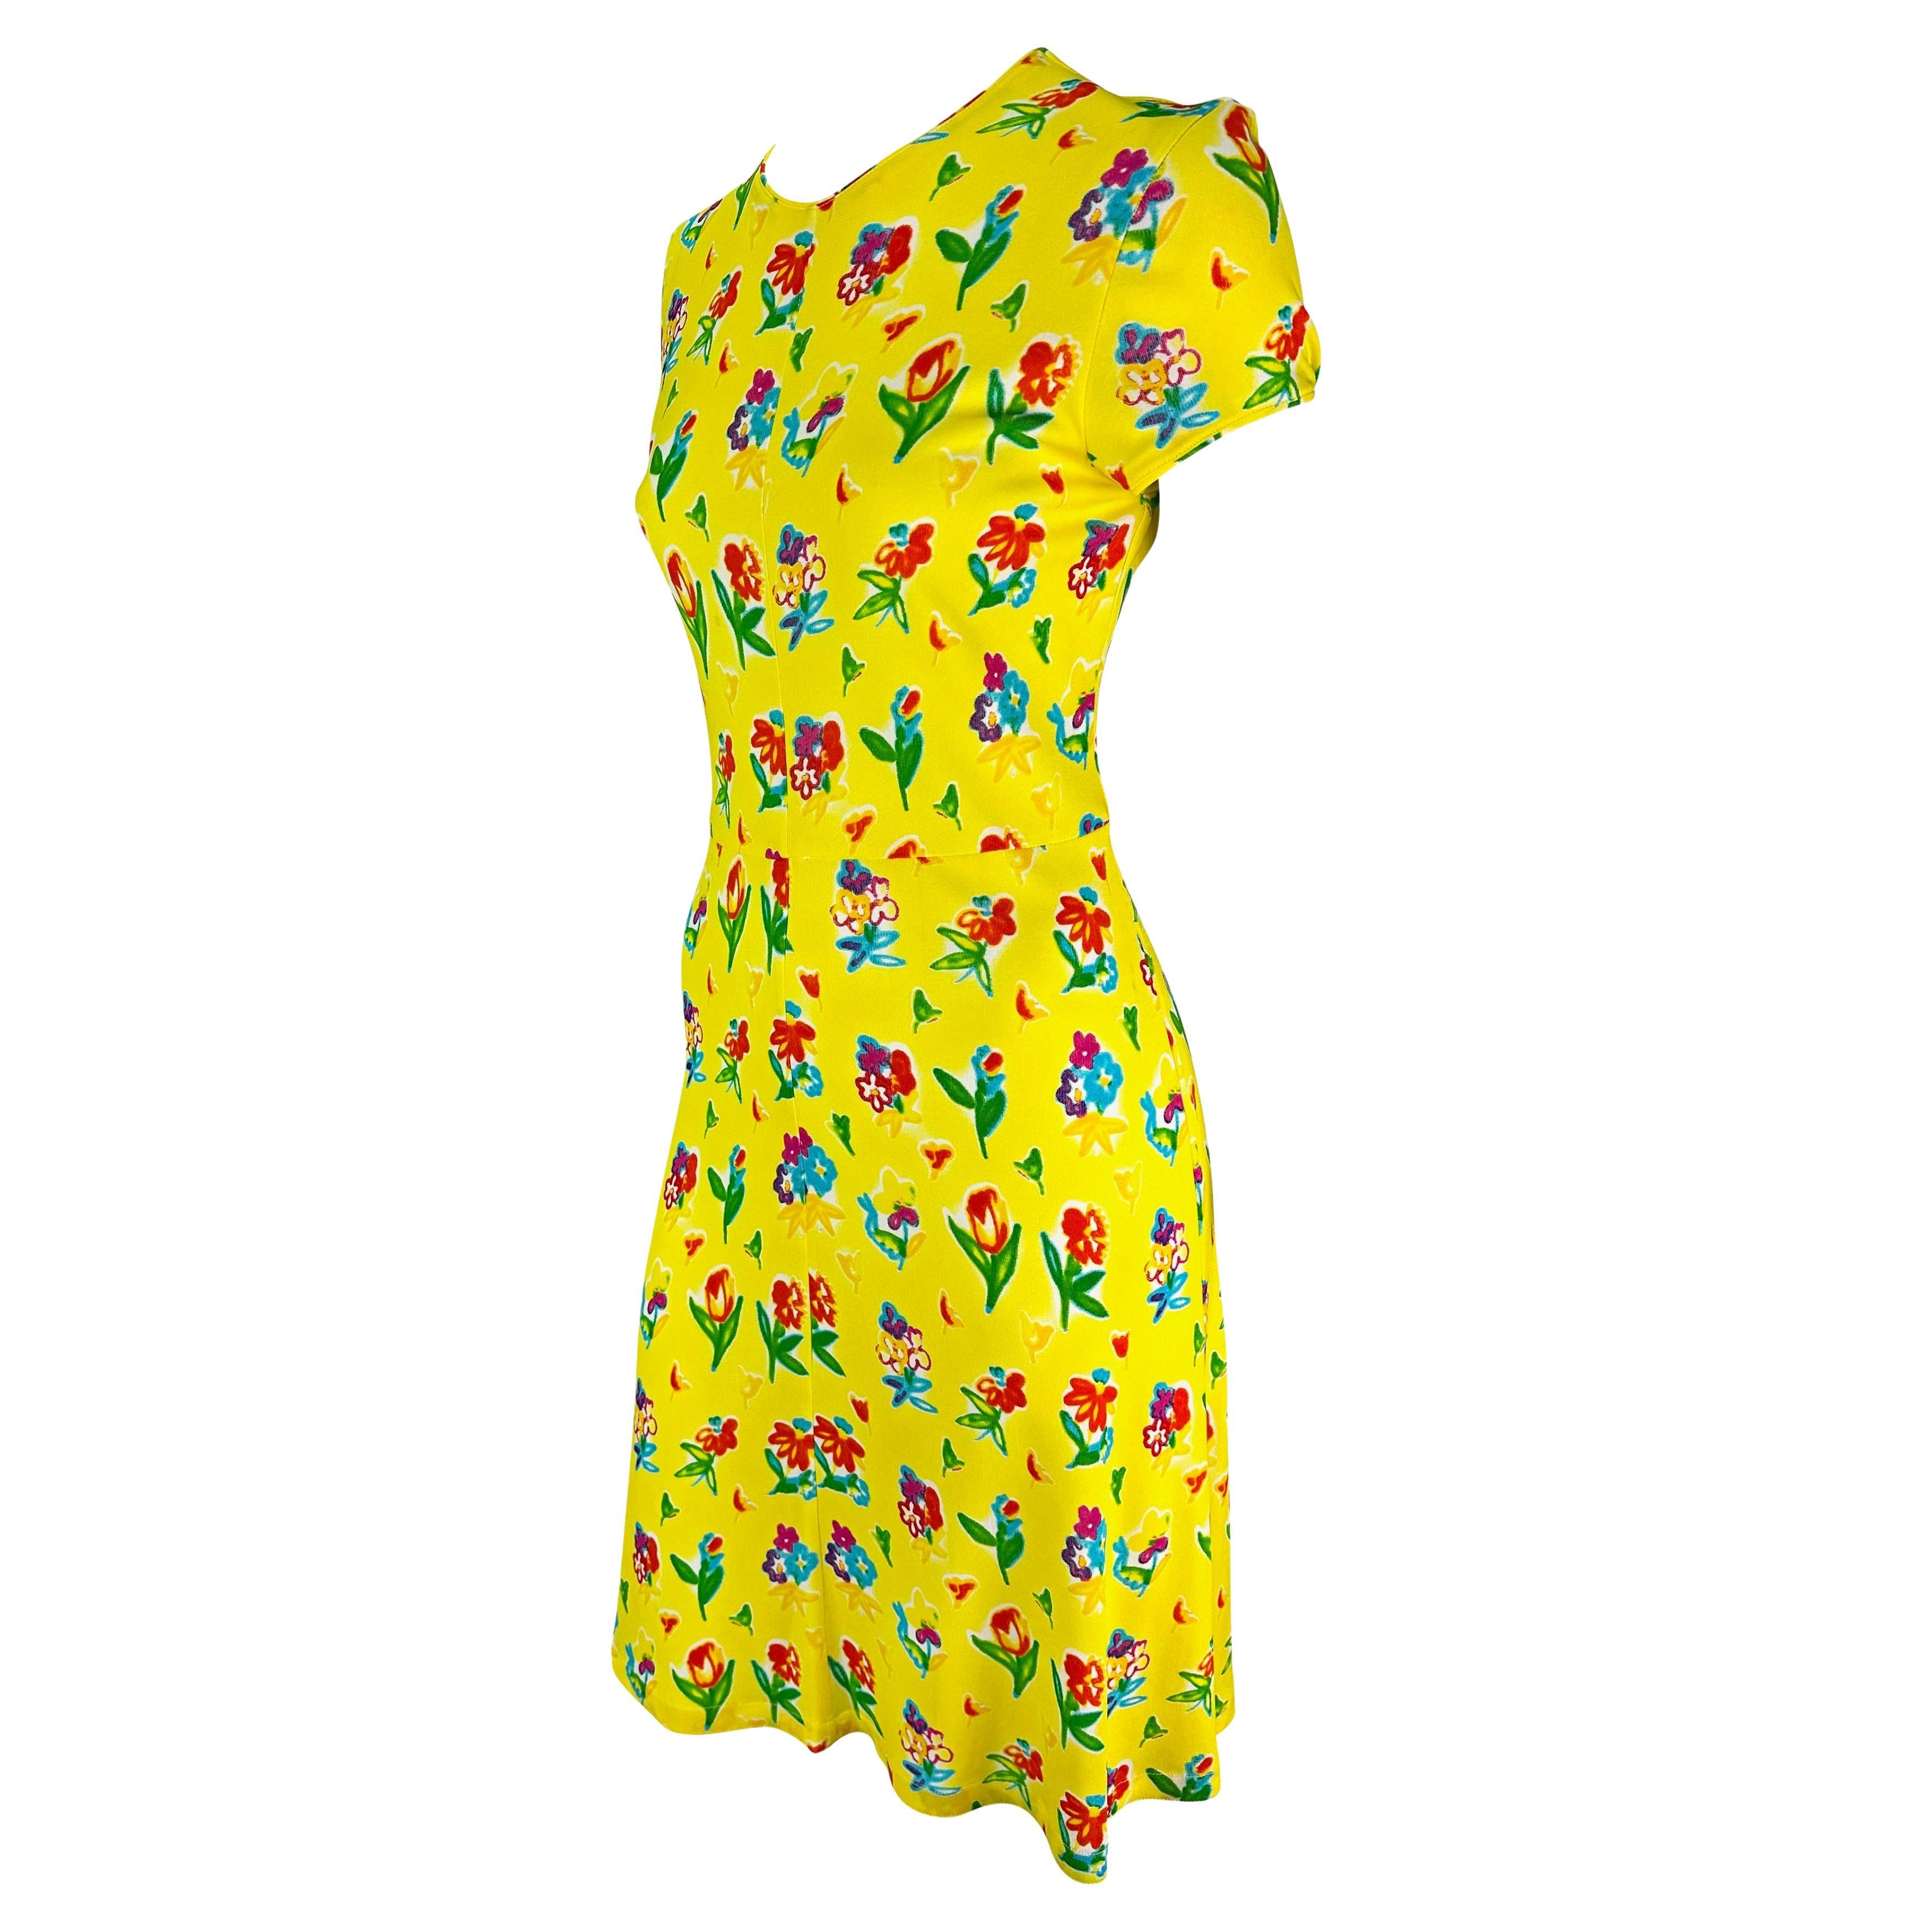 S/S 1996 Gianni Versace Yellow Floral Short Sleeve Viscose Midi Dress In Good Condition For Sale In West Hollywood, CA